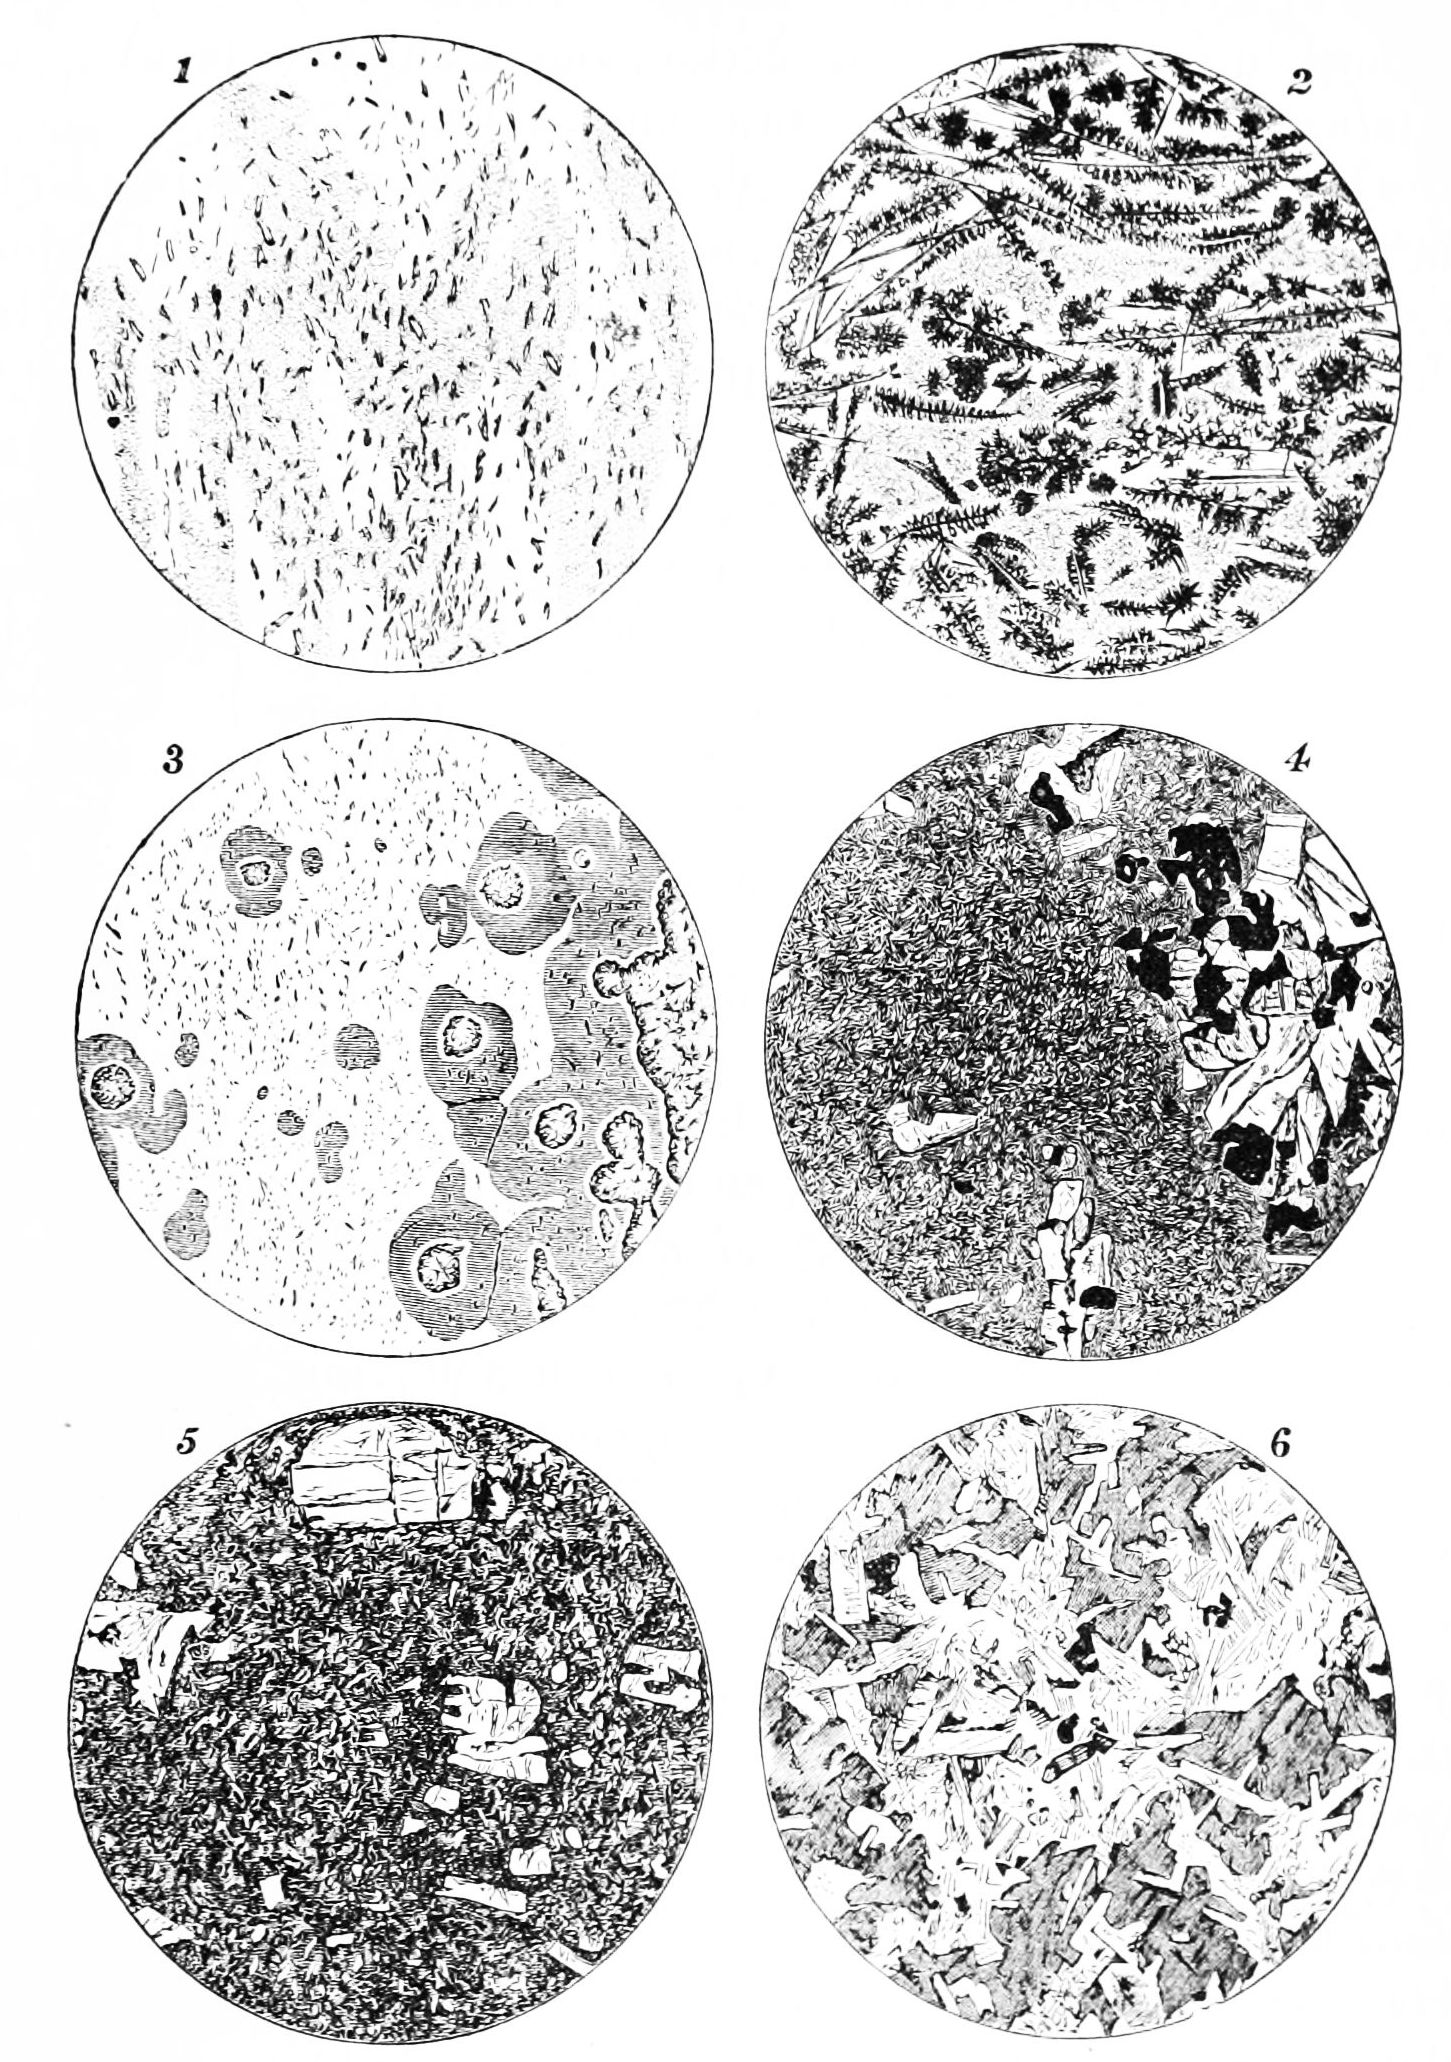 File:PSM V20 D363 Sections of igneous rocks.jpg - Wikimedia Commons